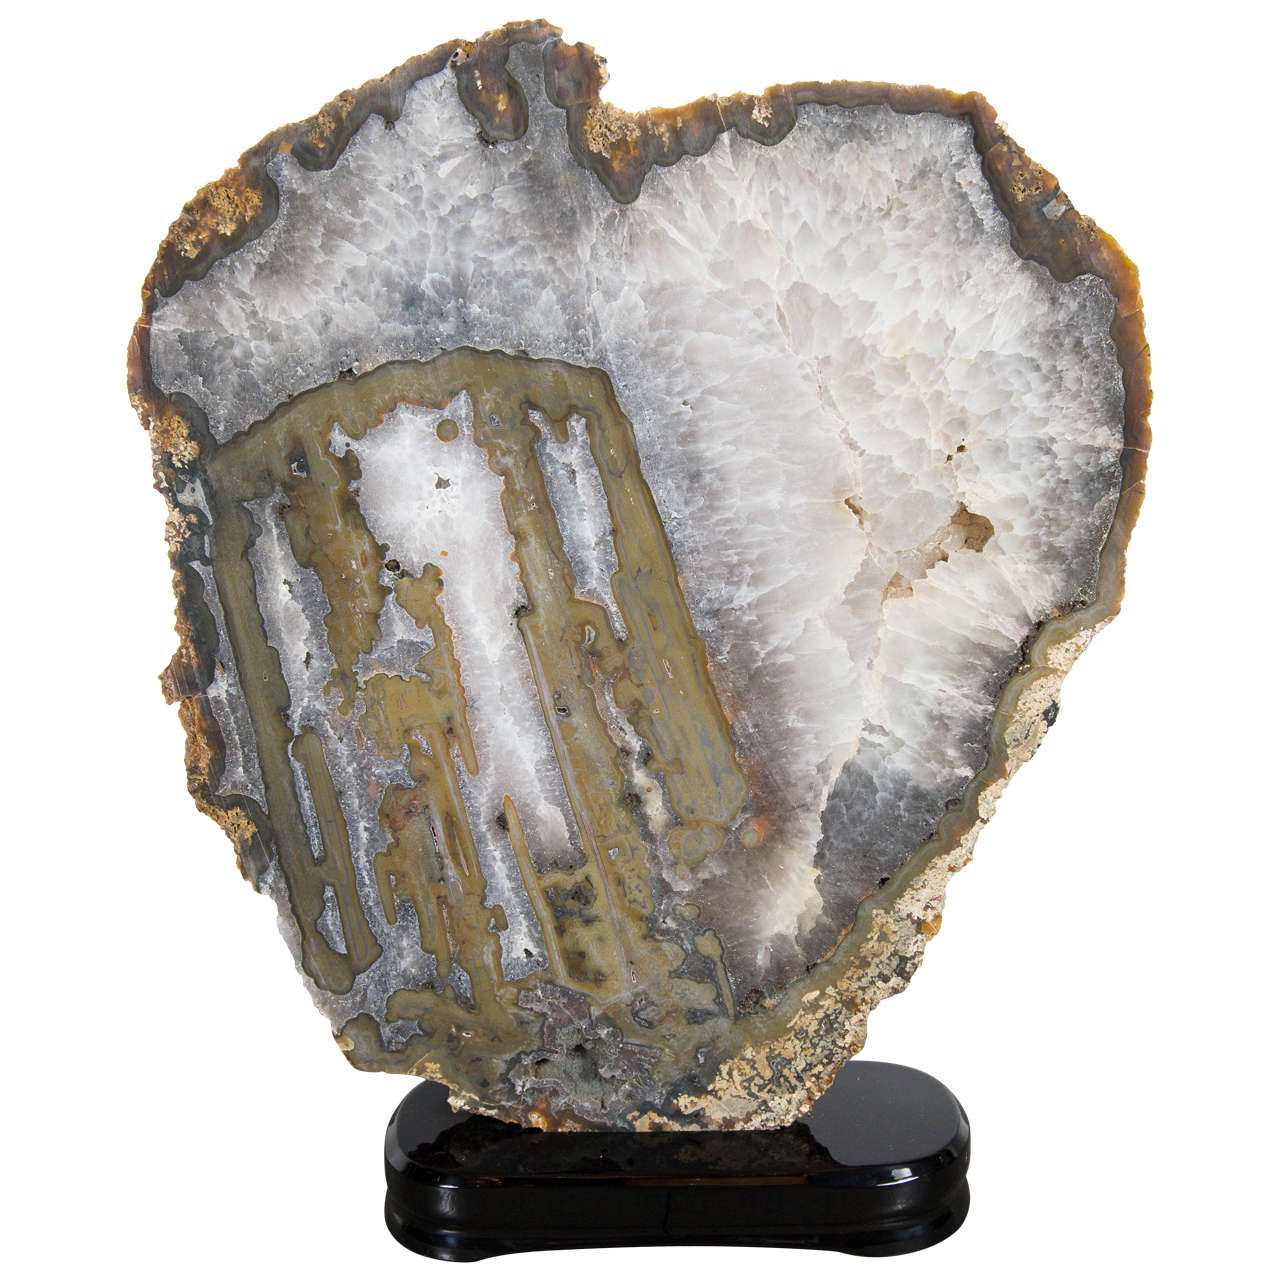 Impressive and Organic Sliced Rock Geode Specimen in Shades of Tobacco and Umber